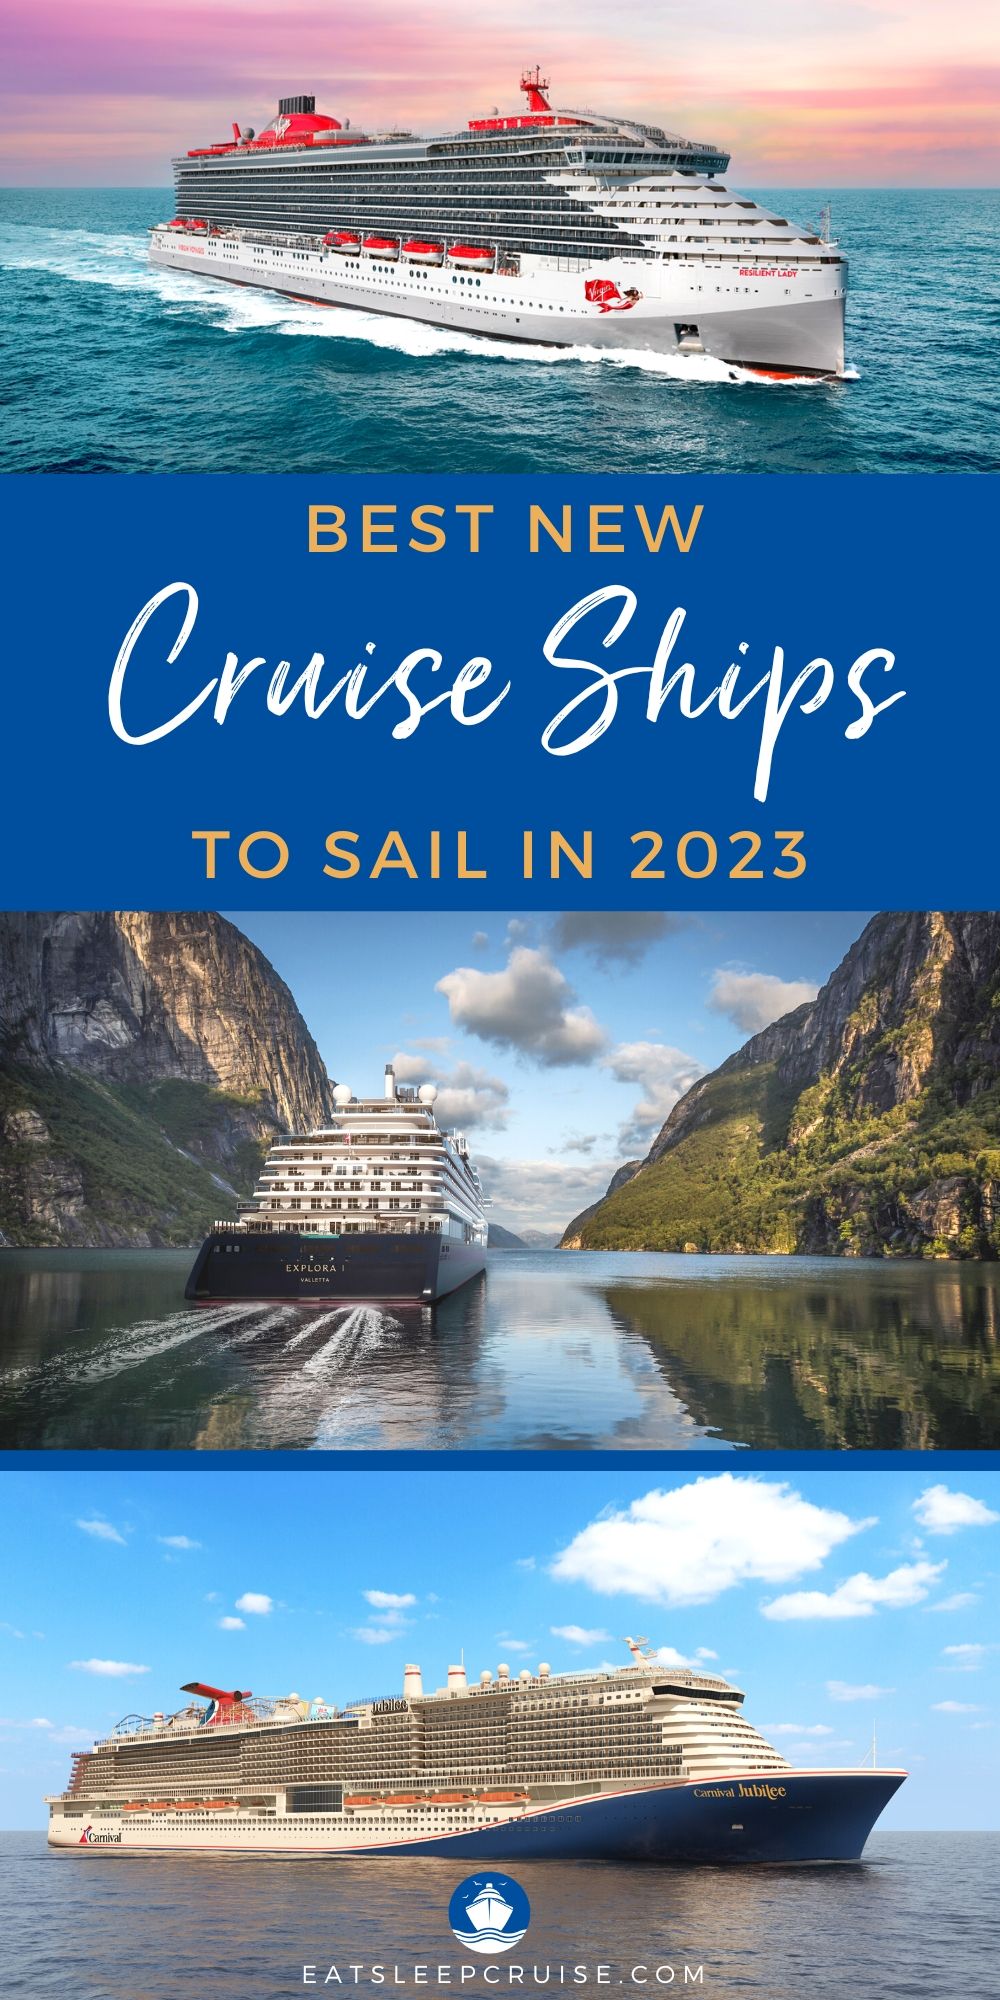 Best New Cruise Ships You Can Sail on in 2023